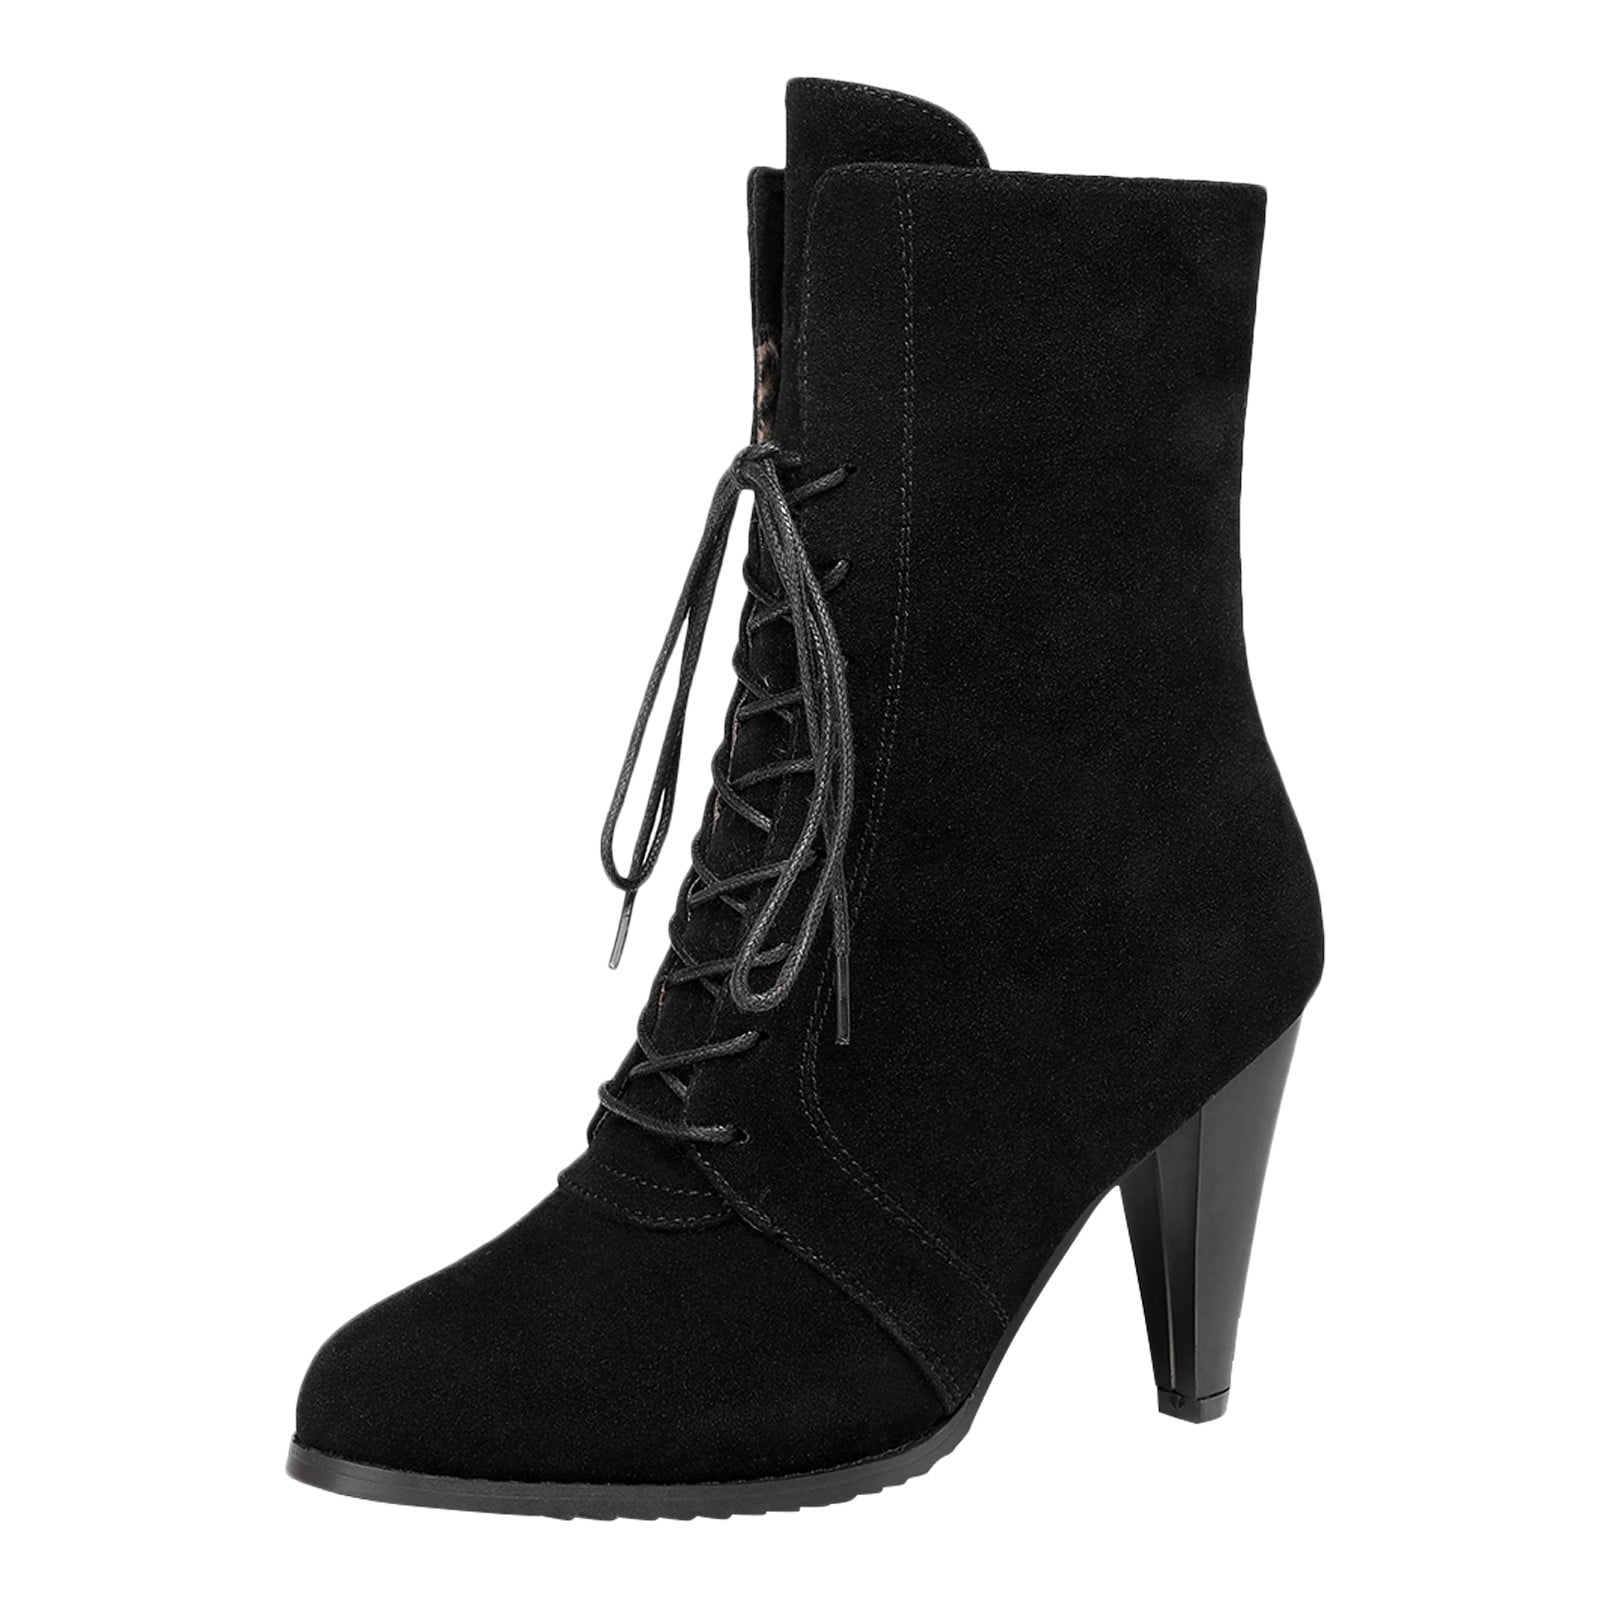 Buy Ravel ladies Galmoy leather boots online at www.ravel.co.uk